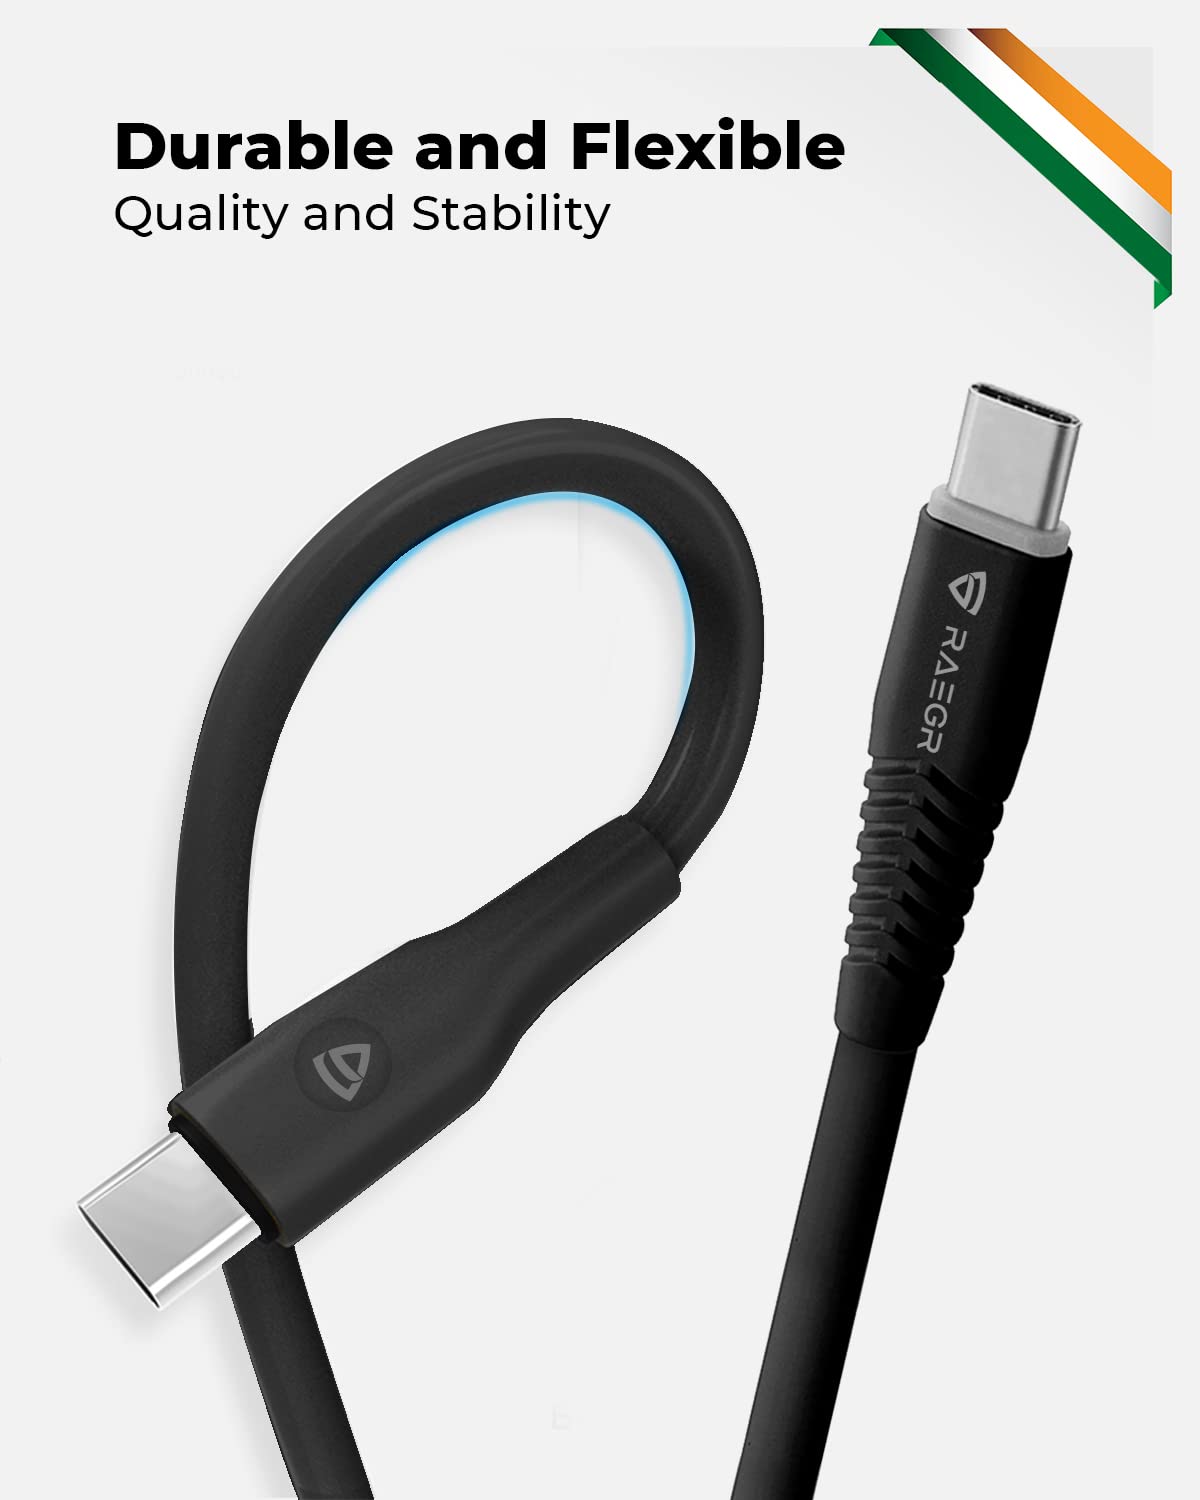 RAEGR RapidLine 100 A2C & C2C Cables Combo Pack, PD Fast Charging